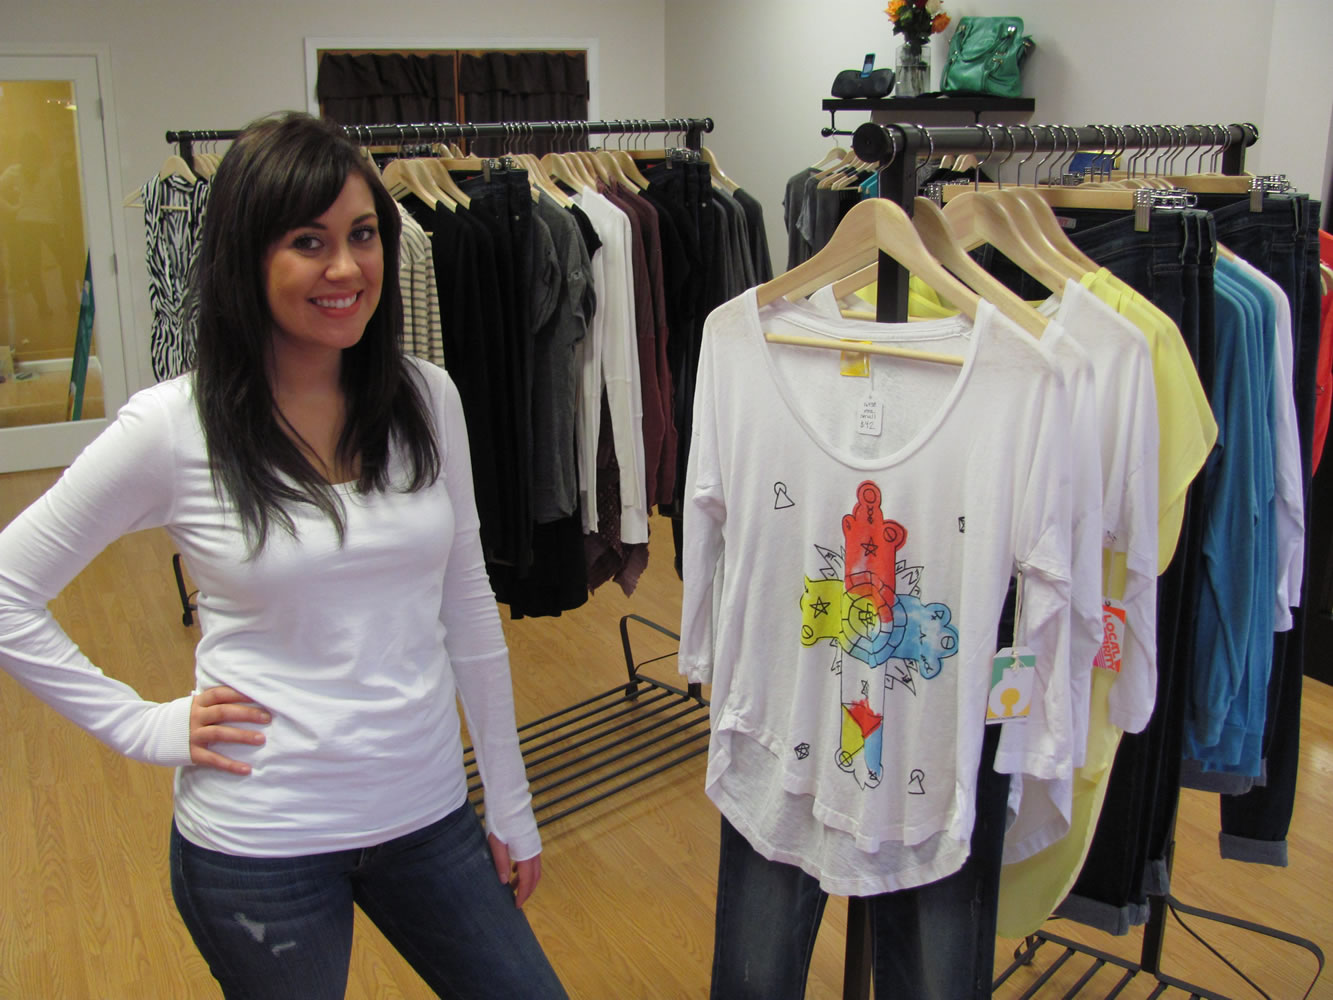 Tanya Gutierrez has opened Bella Vita boutique, in Camas. Her goals include adding to the inventory of purses, women's clothing and accessories on a regular basis.